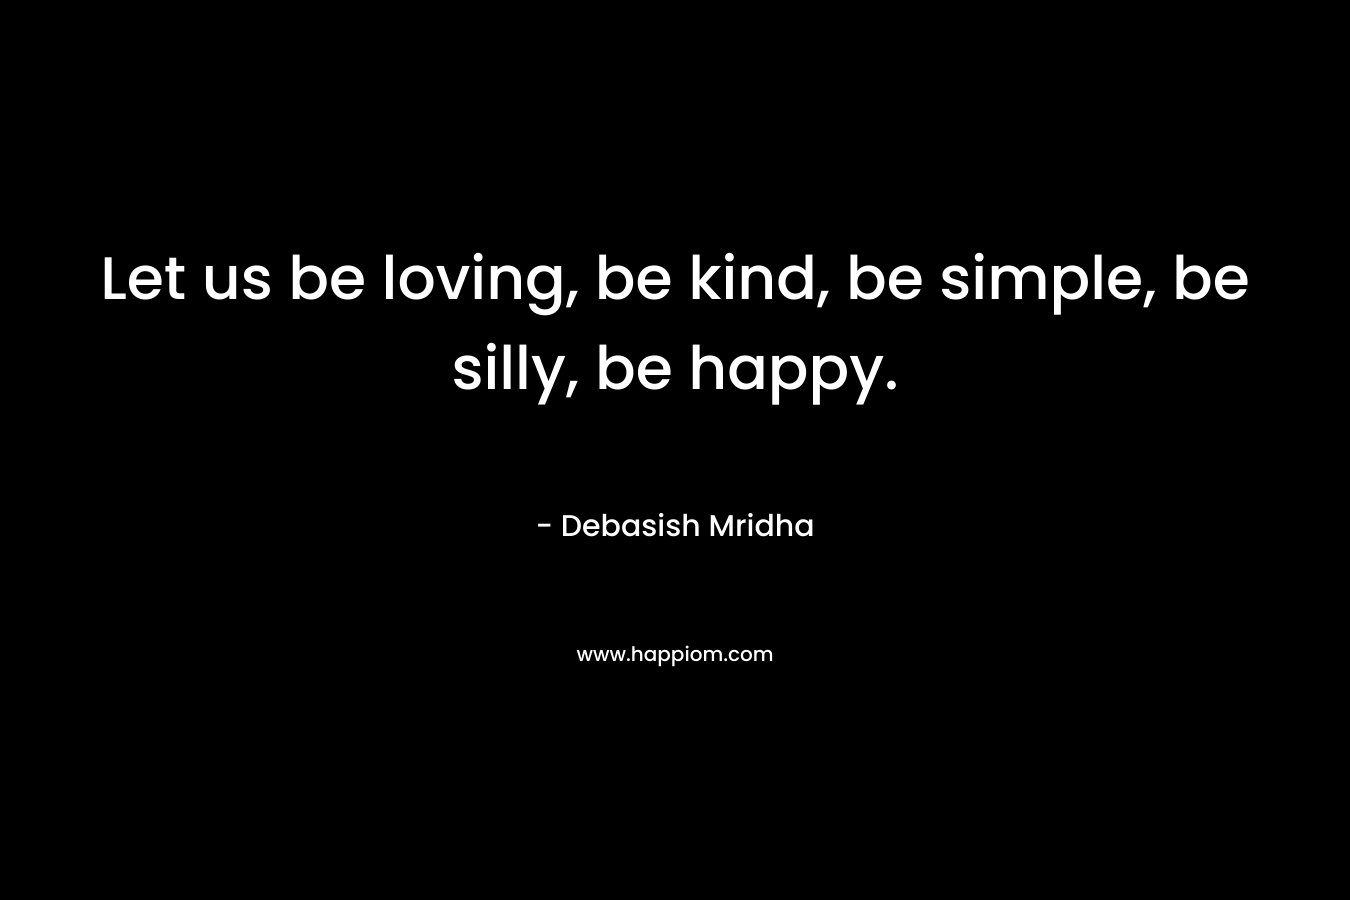 Let us be loving, be kind, be simple, be silly, be happy.